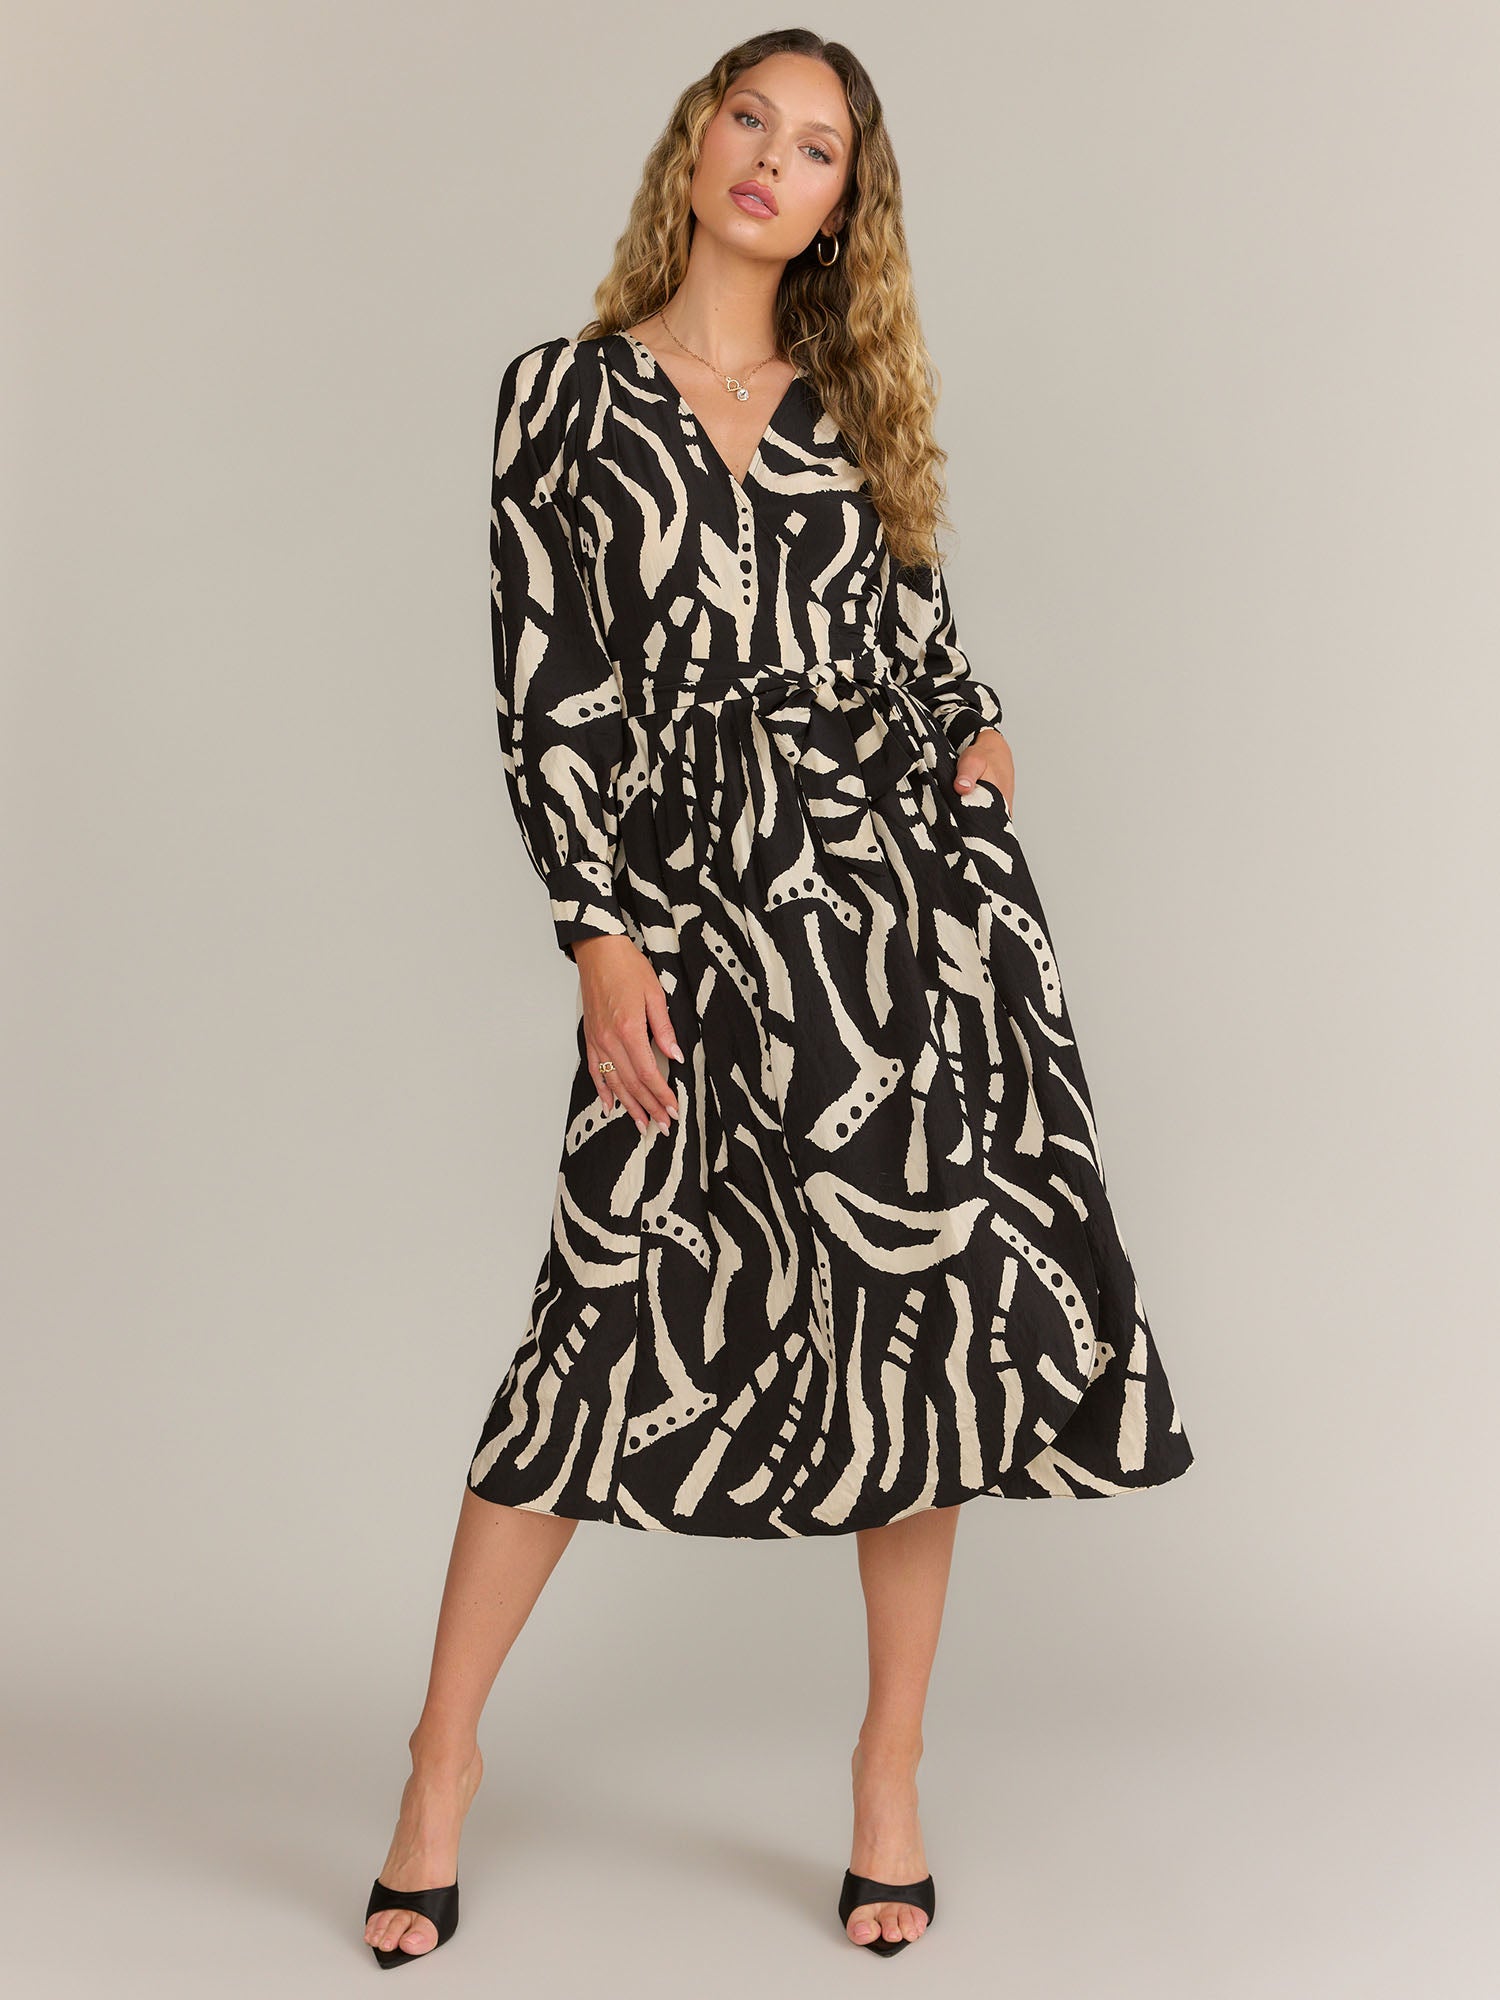 Dress Forum Abstract Print Wrap Dress - Brands We Love | NY&Co